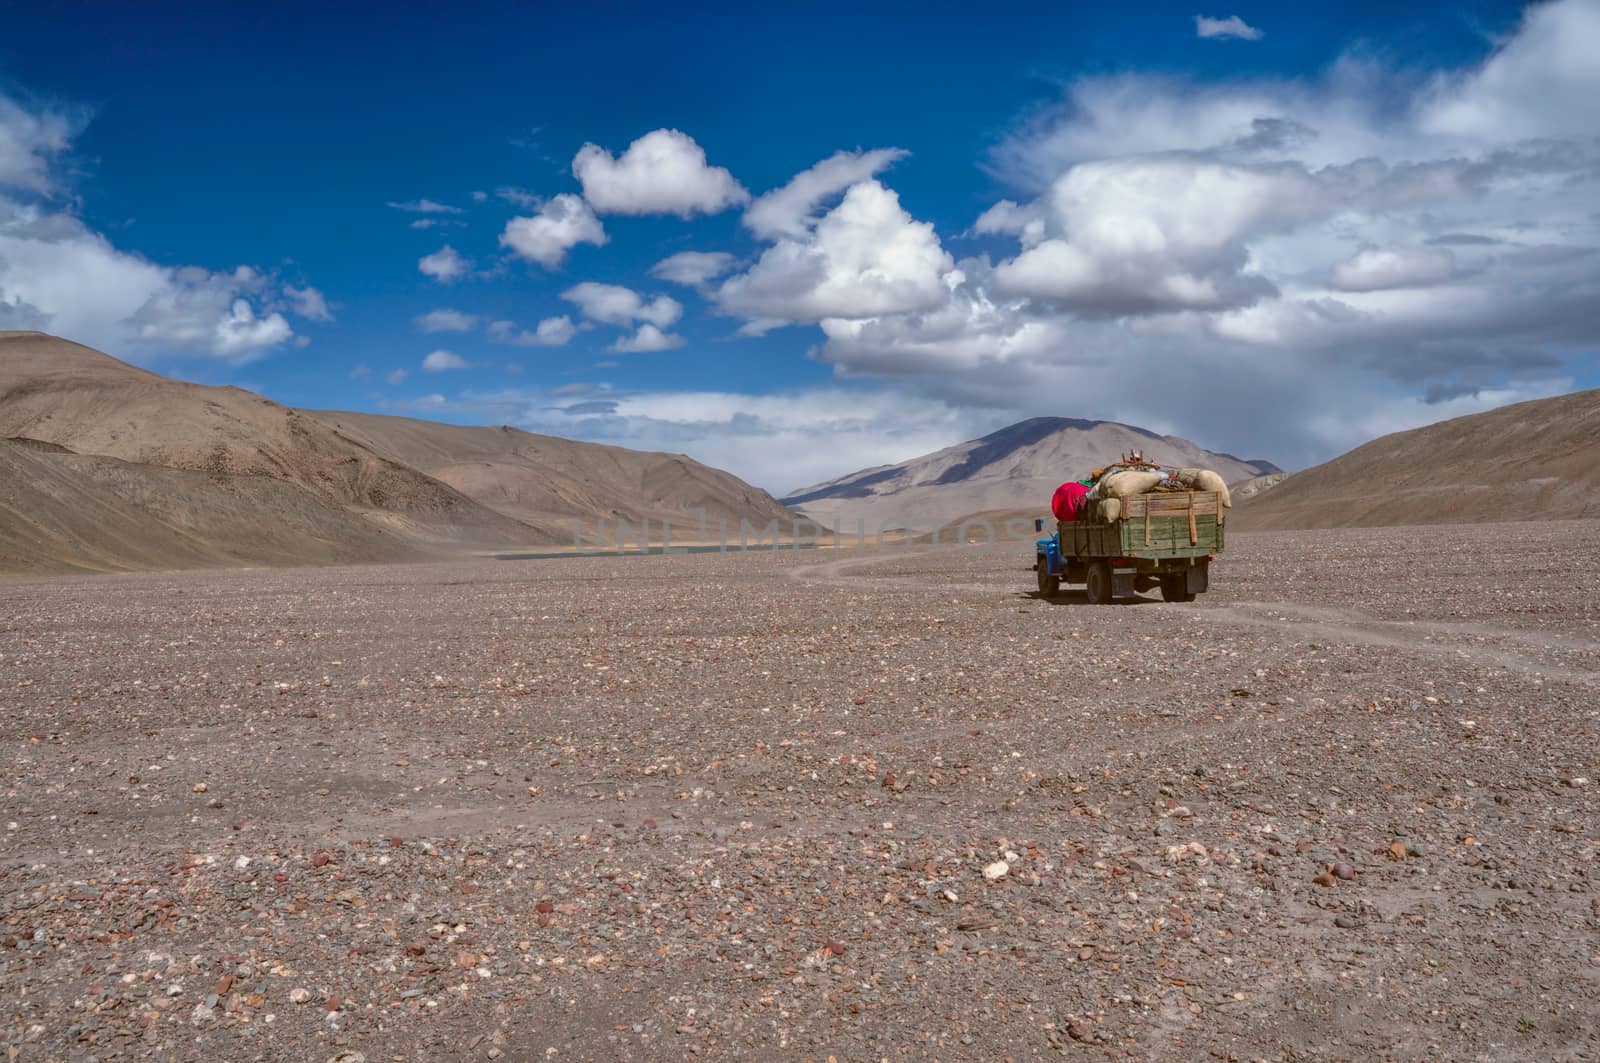 Truck loaded with goods on the road in Pamir mountains in Tajikistan